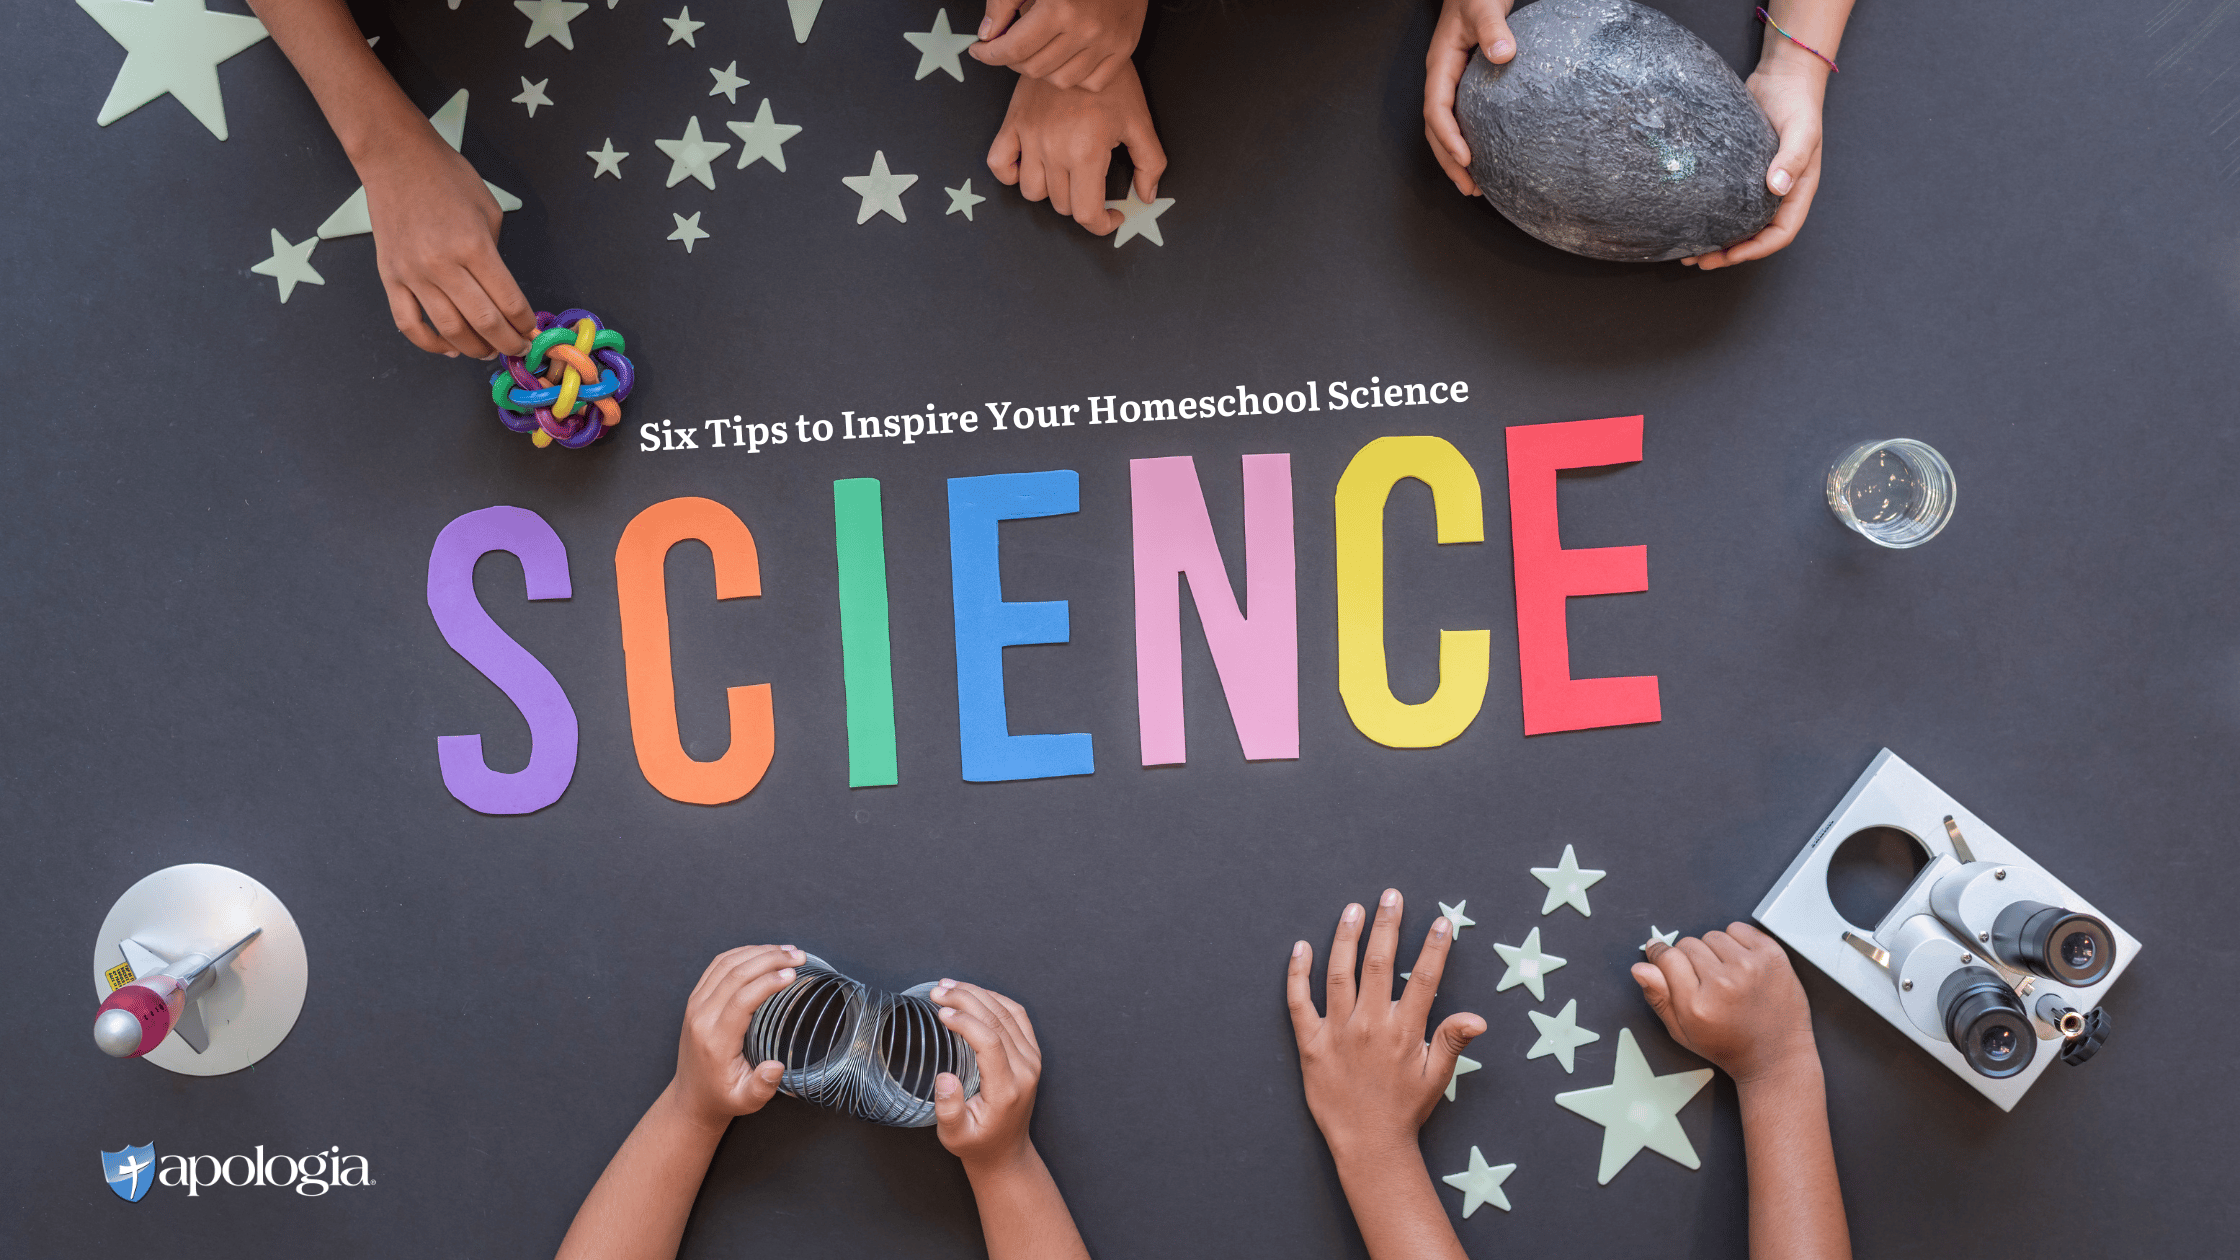 Six Tips to Inspire Your Homeschool Science